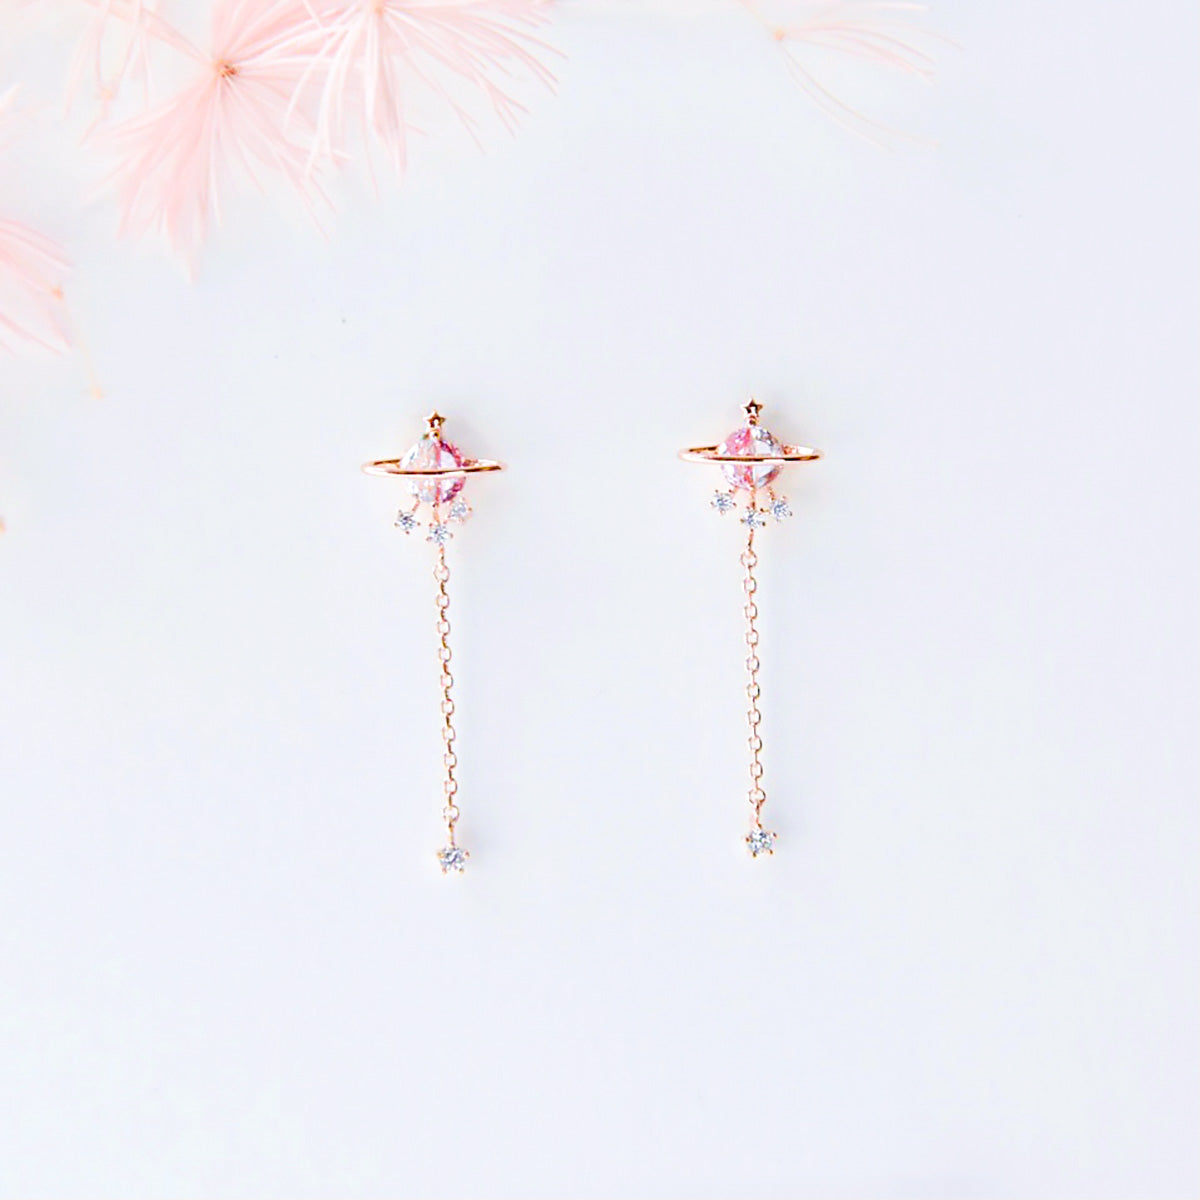 Rose Gold Made in Korea Earrings Korean Anting Cubic Zirconia Jewellery Malaysia Instagram 925 Sterling Silver hypoallergenic Instagram gift shops Jewellery Online Malaysia Shopping No Piercing Perfect Gift special gift Loved One Online jewellery Malaysia Gift for her Rose Gold Korea Made Earrings Korean Jewellery Jewelry Cubic Zirconia Dainty Delicate Minimalist Jewellery Jewelry Bride Clip On Earrings Silver Gift Set present gift for her gift ideas daily wear earrings spring earrings birthday gift